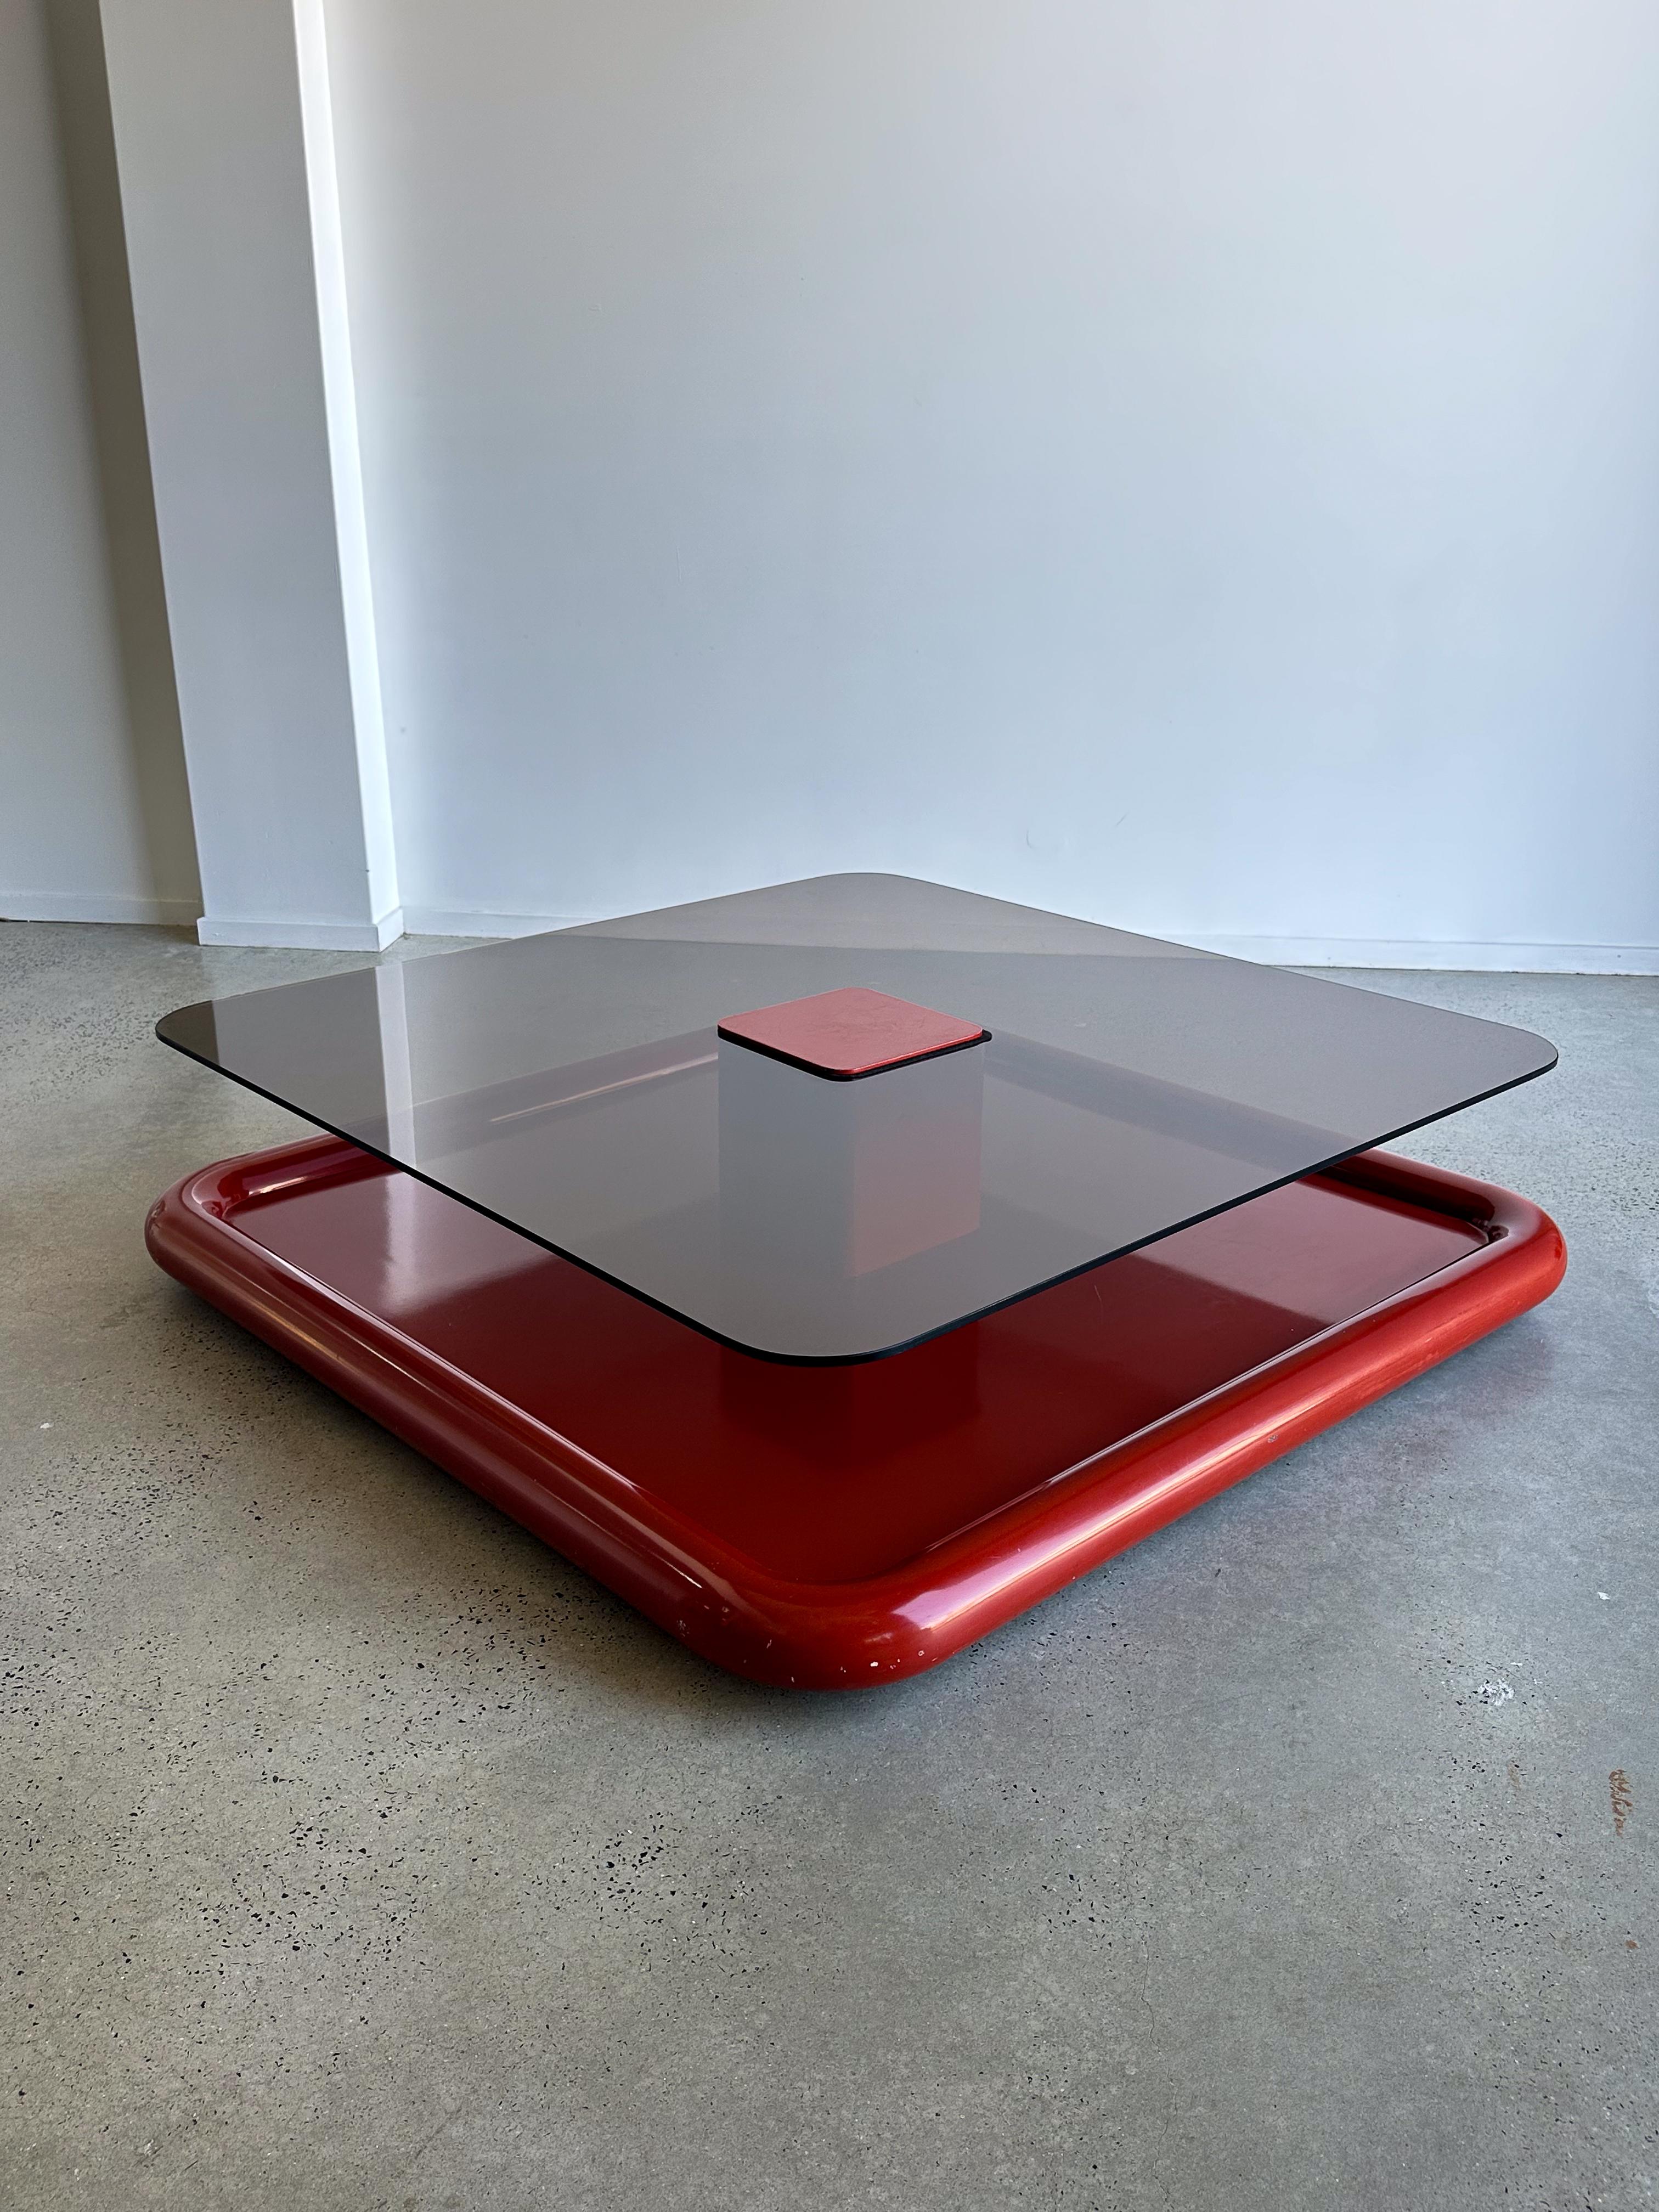 Marzio Cecchi for Studio Most Dark Smoked Glass Square Floating Coffee Table  In Good Condition For Sale In Byron Bay, NSW